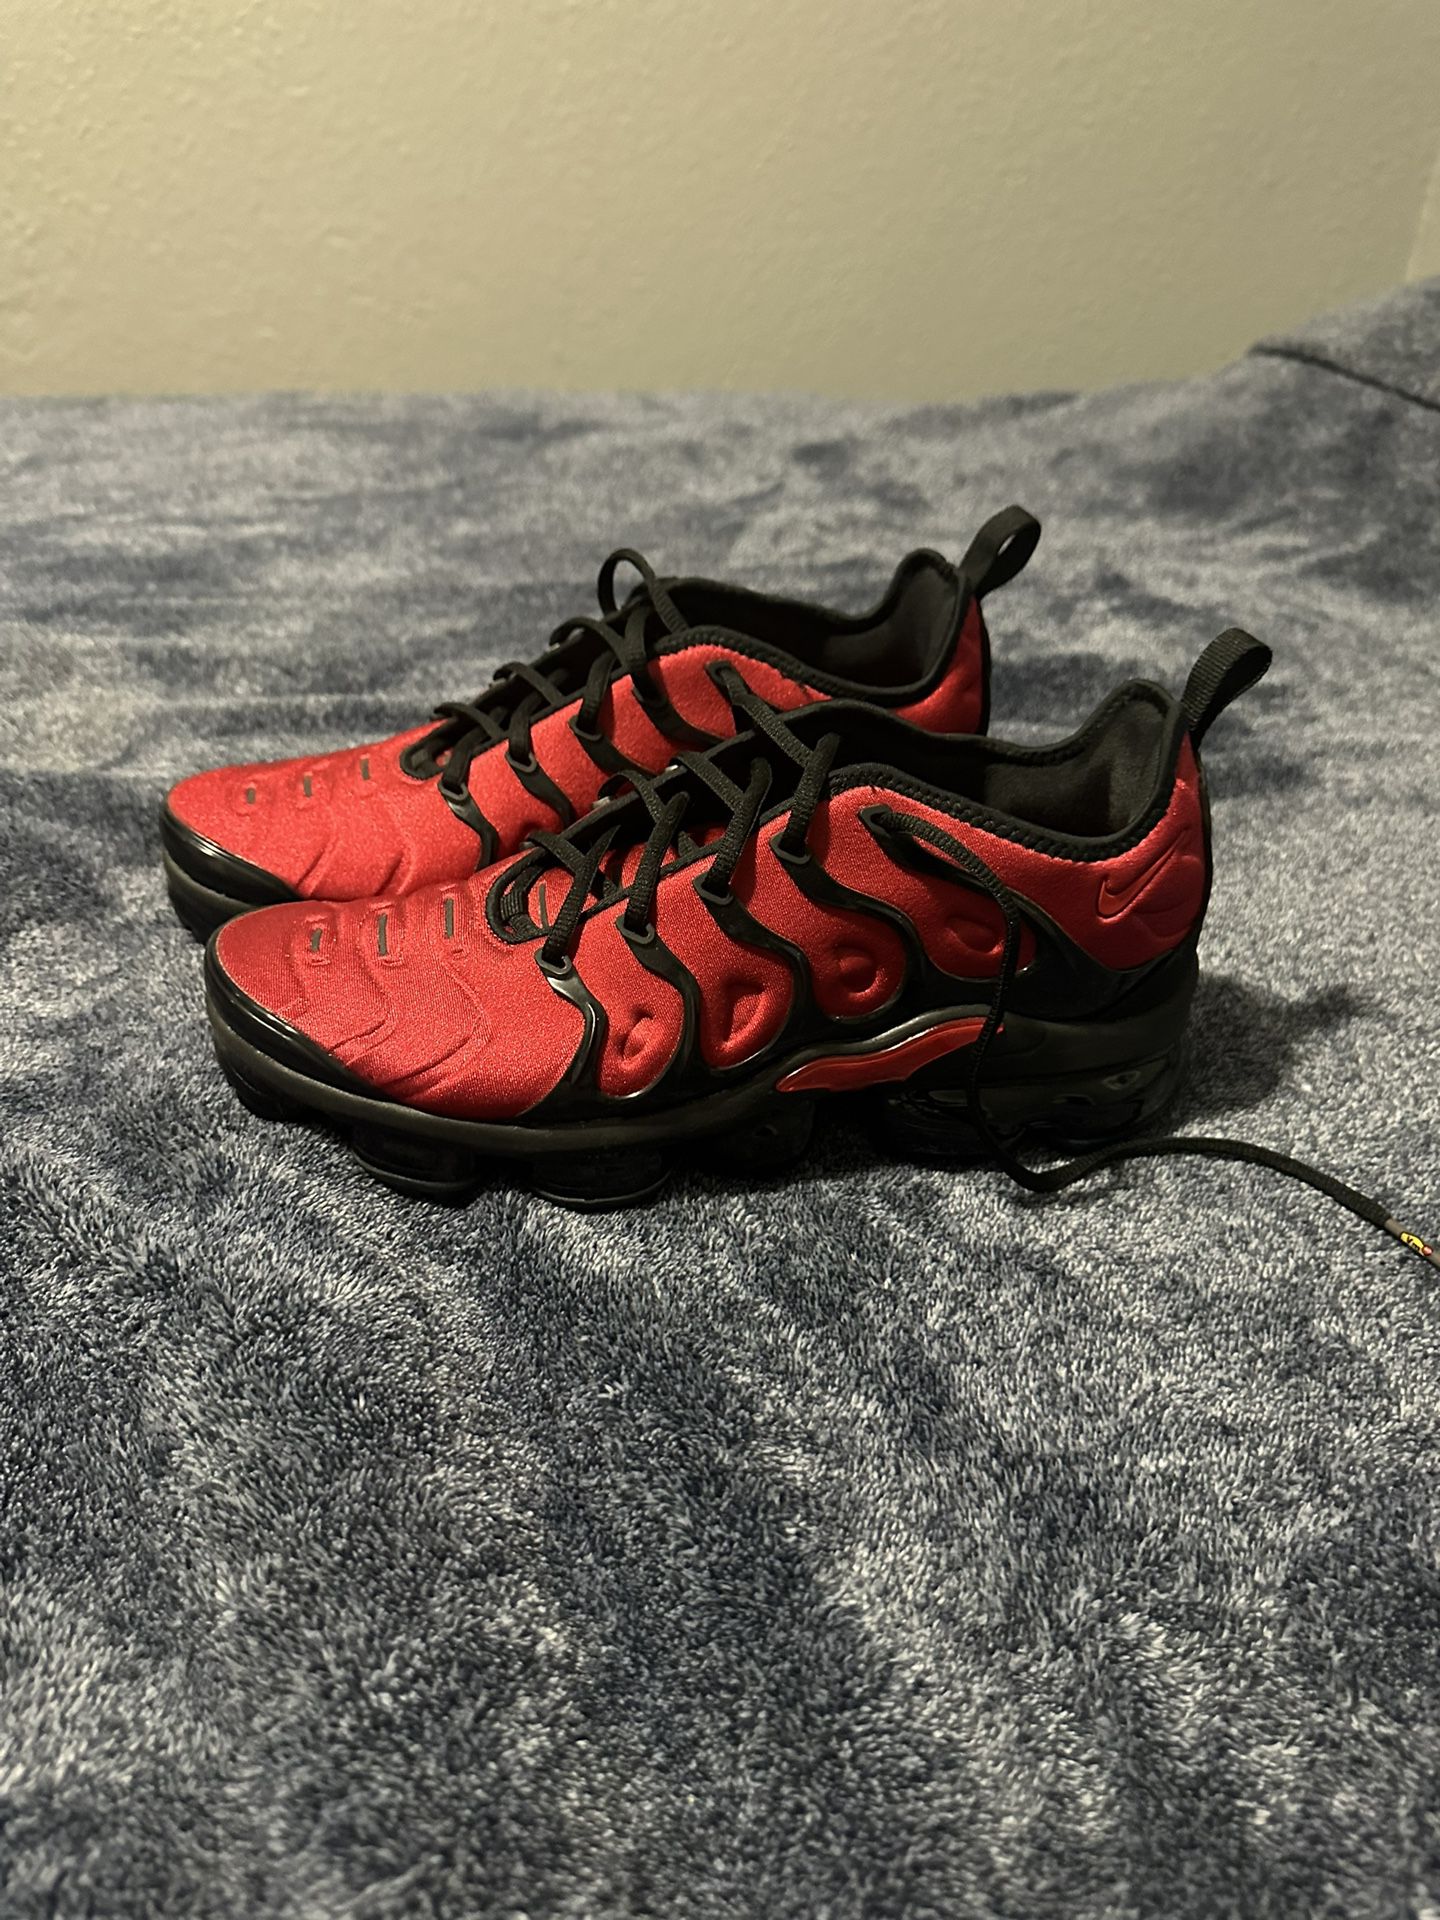 Nike Vapormax Red and Black size 9